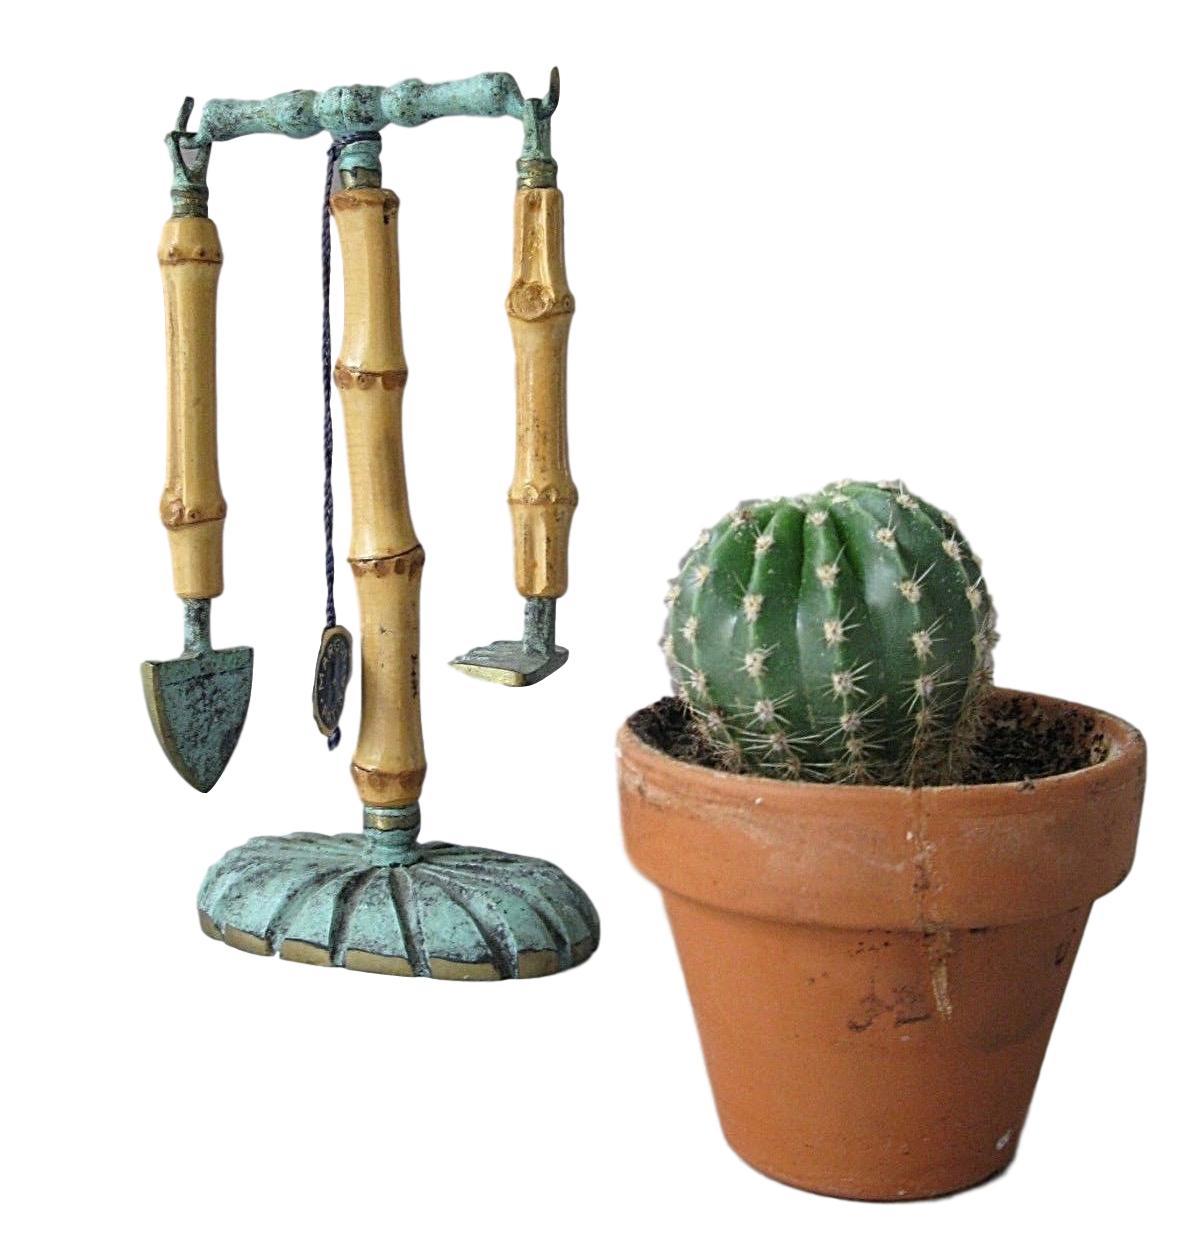 A beautiful tool set from the 1950s. This unique object, is made of bronze with bamboo, was traditionally a cactus gardening tool set. A nice original midcentury item for displaying or just to use. It is in the original as found condition, i think